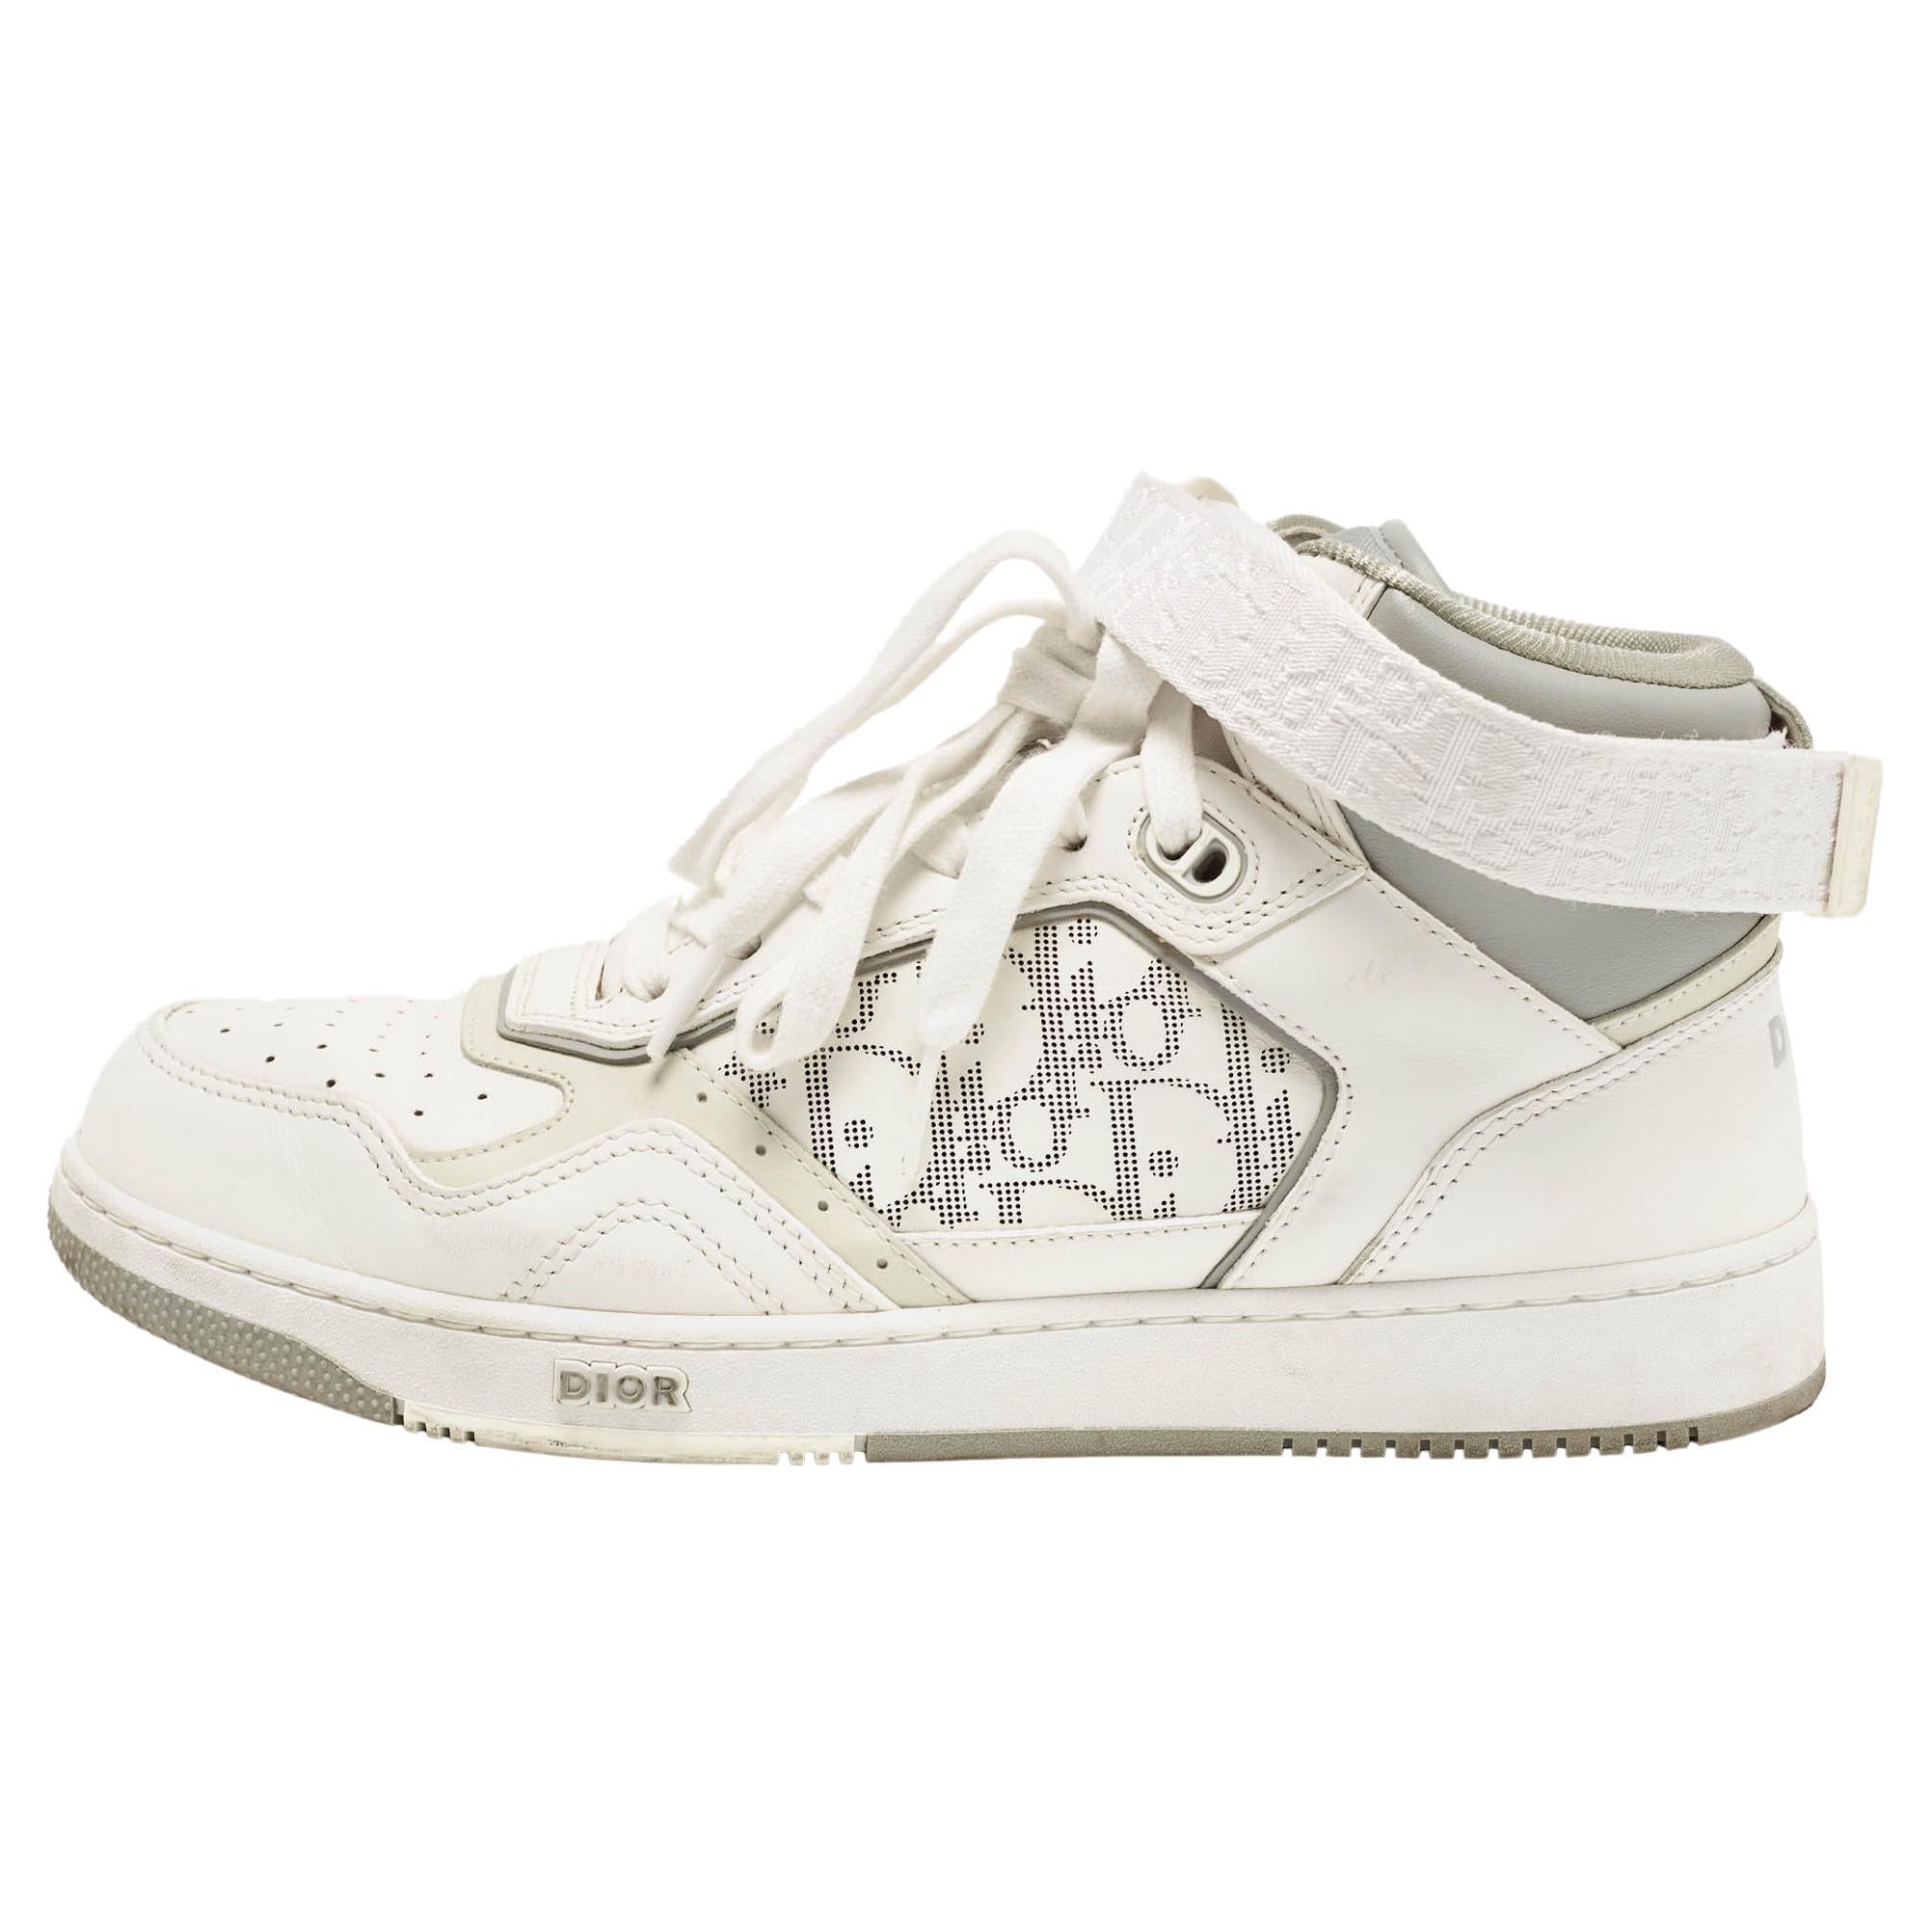 Dior White/Grey Leather B27 High Top Sneakers Size 42 For Sale